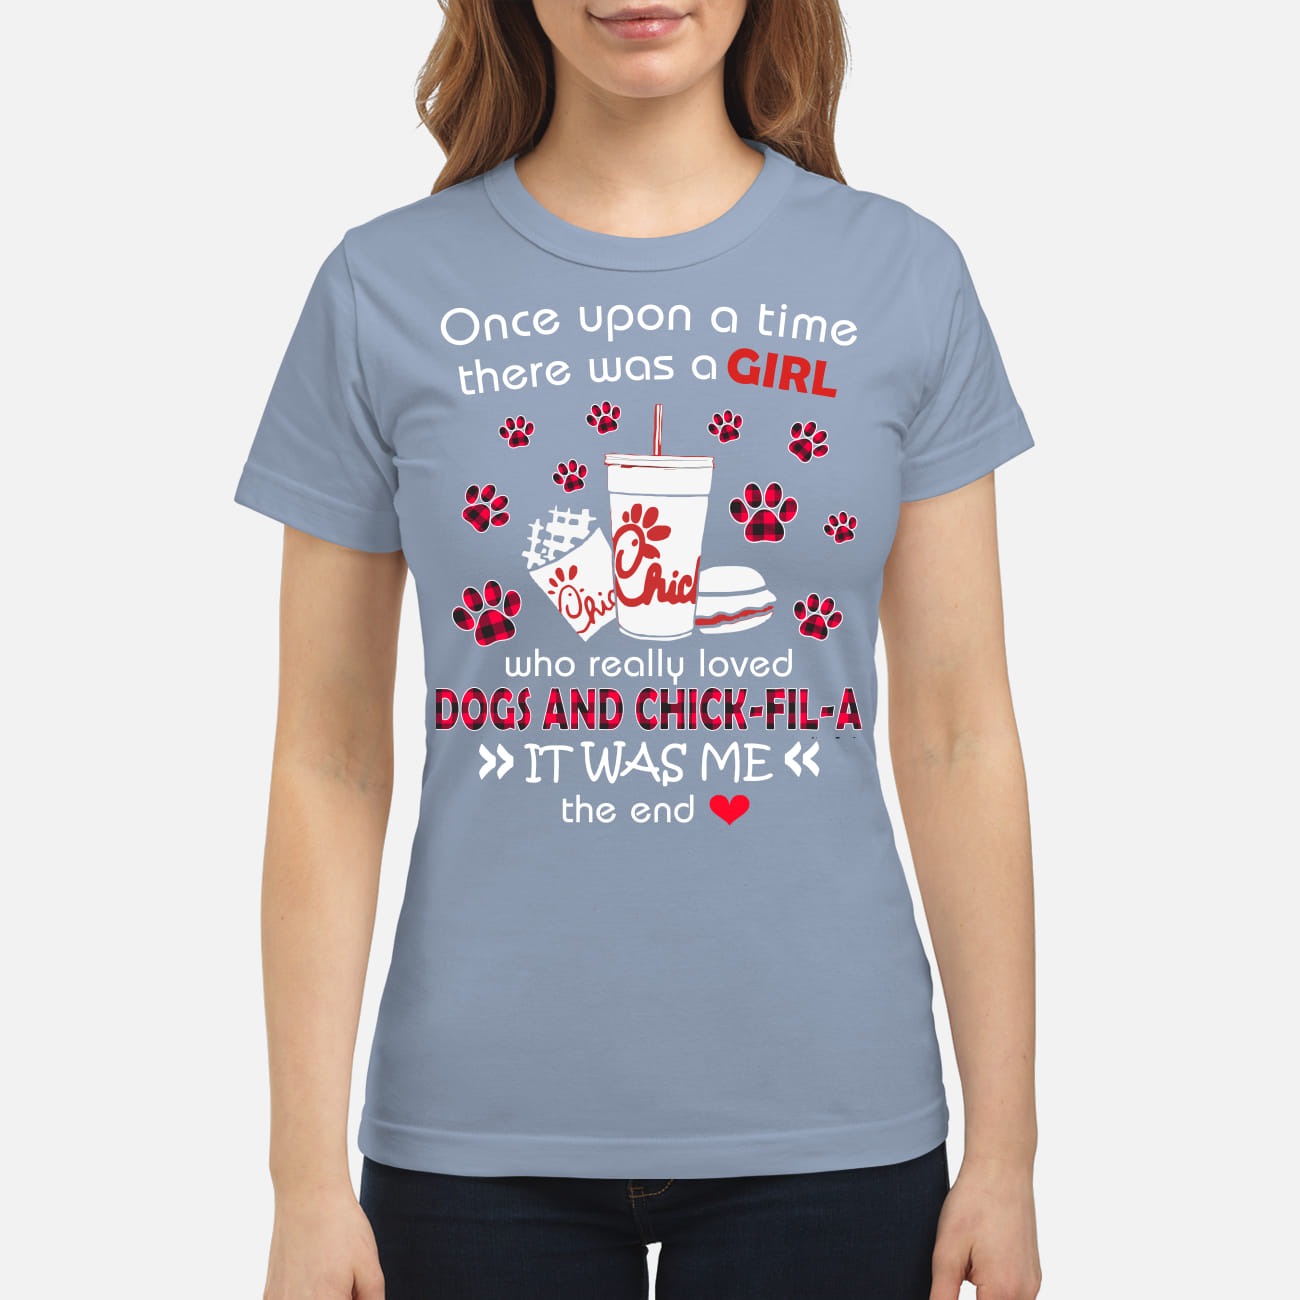 There was a girl who really loved dogs and chick fil a clasisc shirt